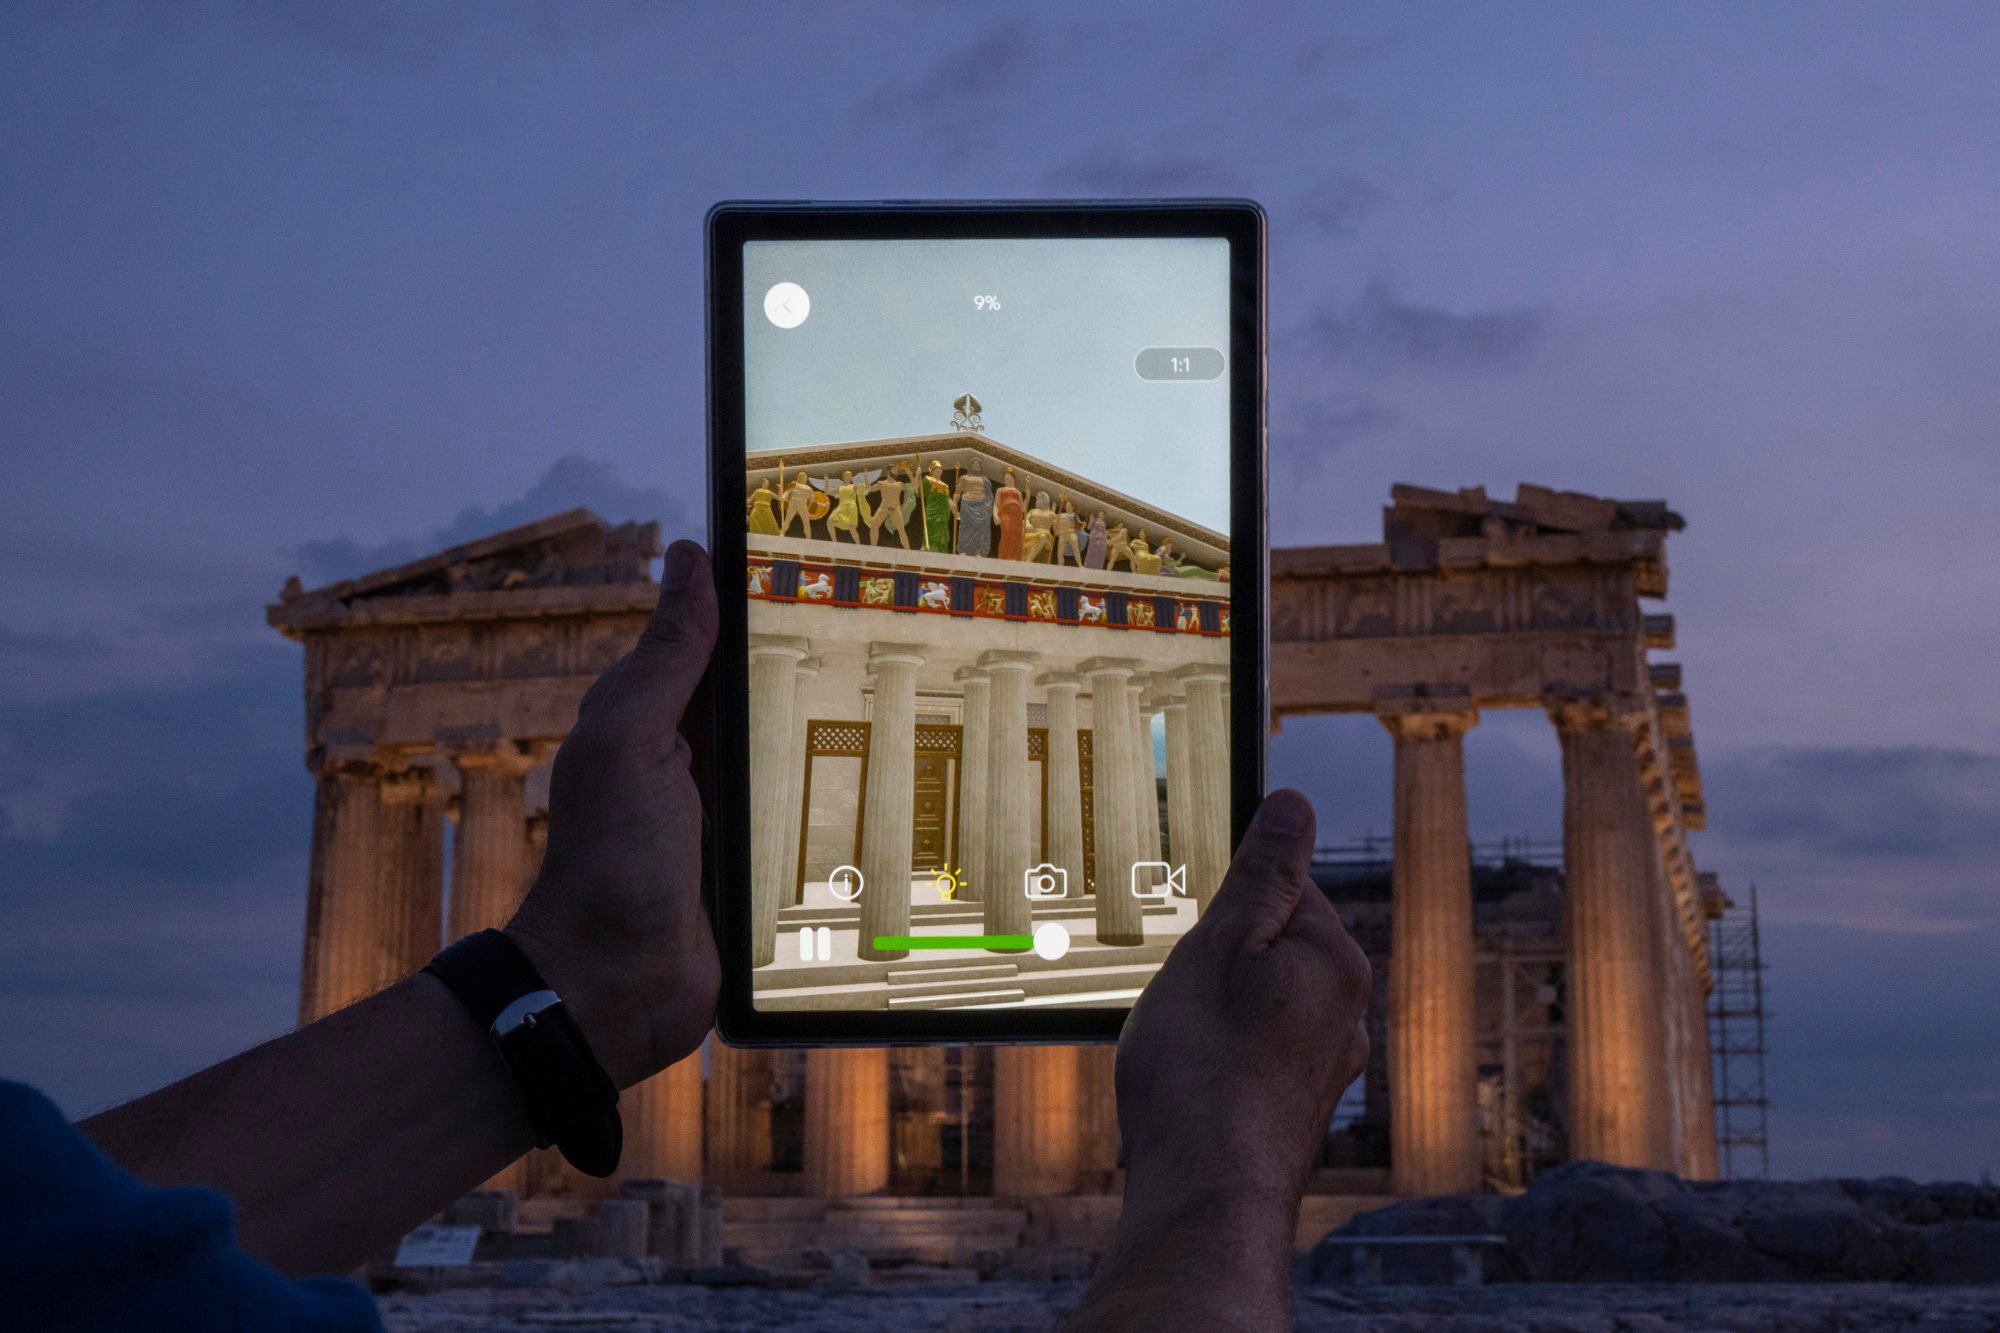 Visitors can pinch and zoom their way around the Parthenon through an app. Photo: AP